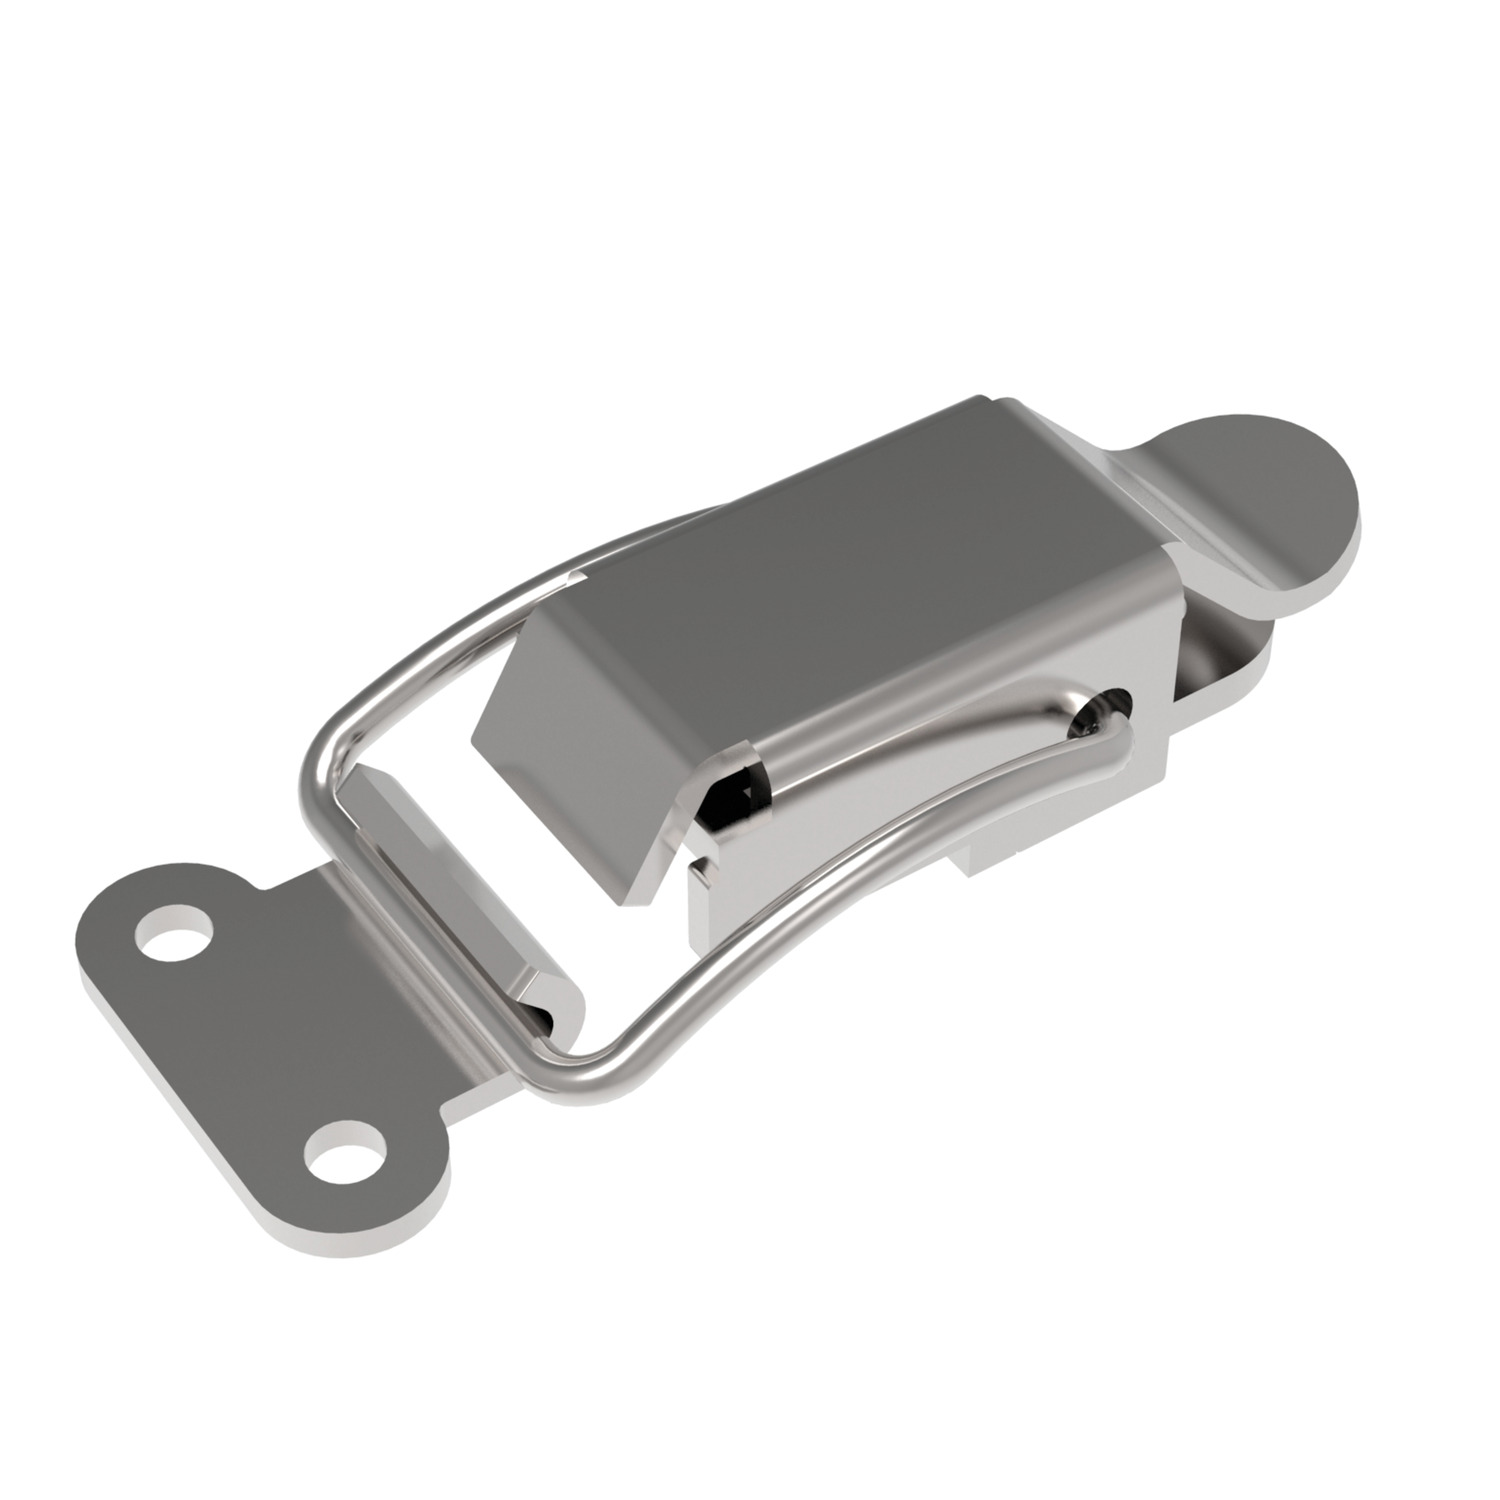 J0640.AC0030 Toggle Latches Stainless Steel - 55 - 12 - 23